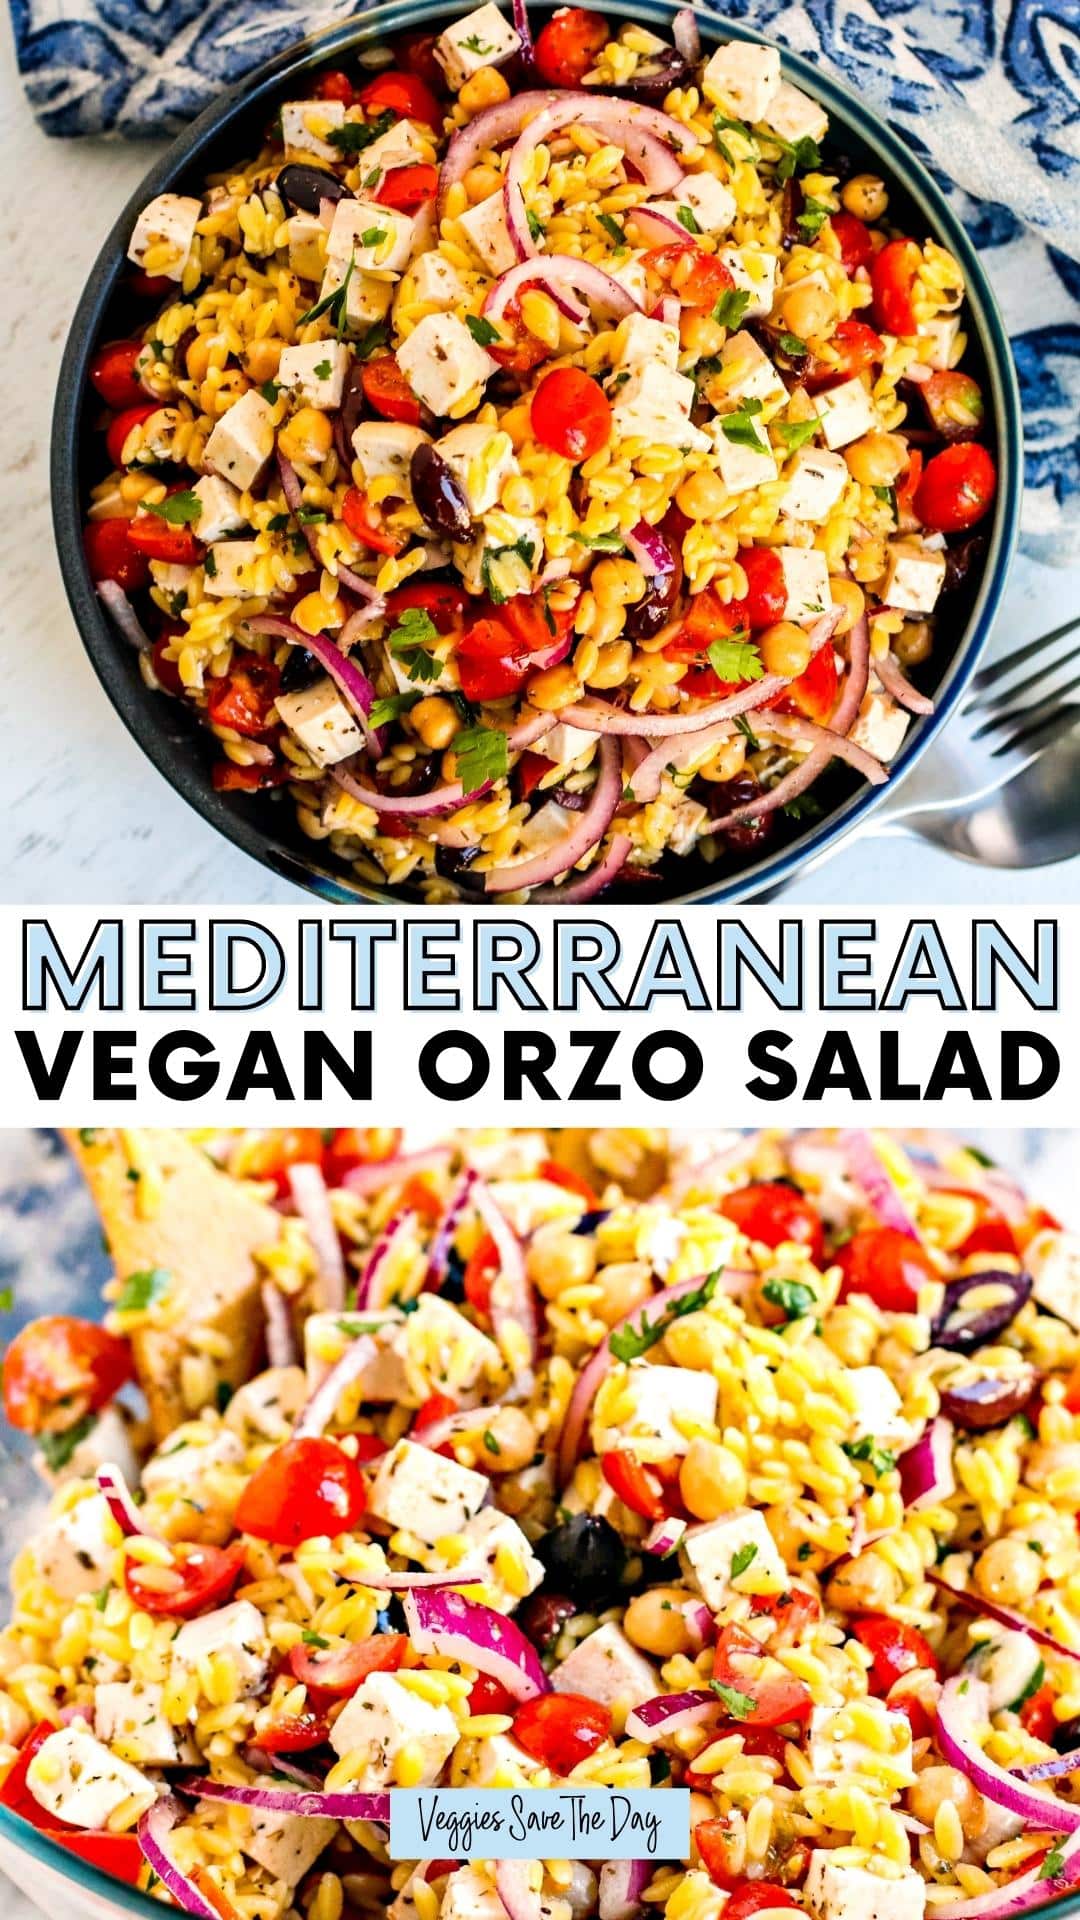 Bowl of Mediterranean Vegan Orzo Salad in top image and close up of salad in bottom image.